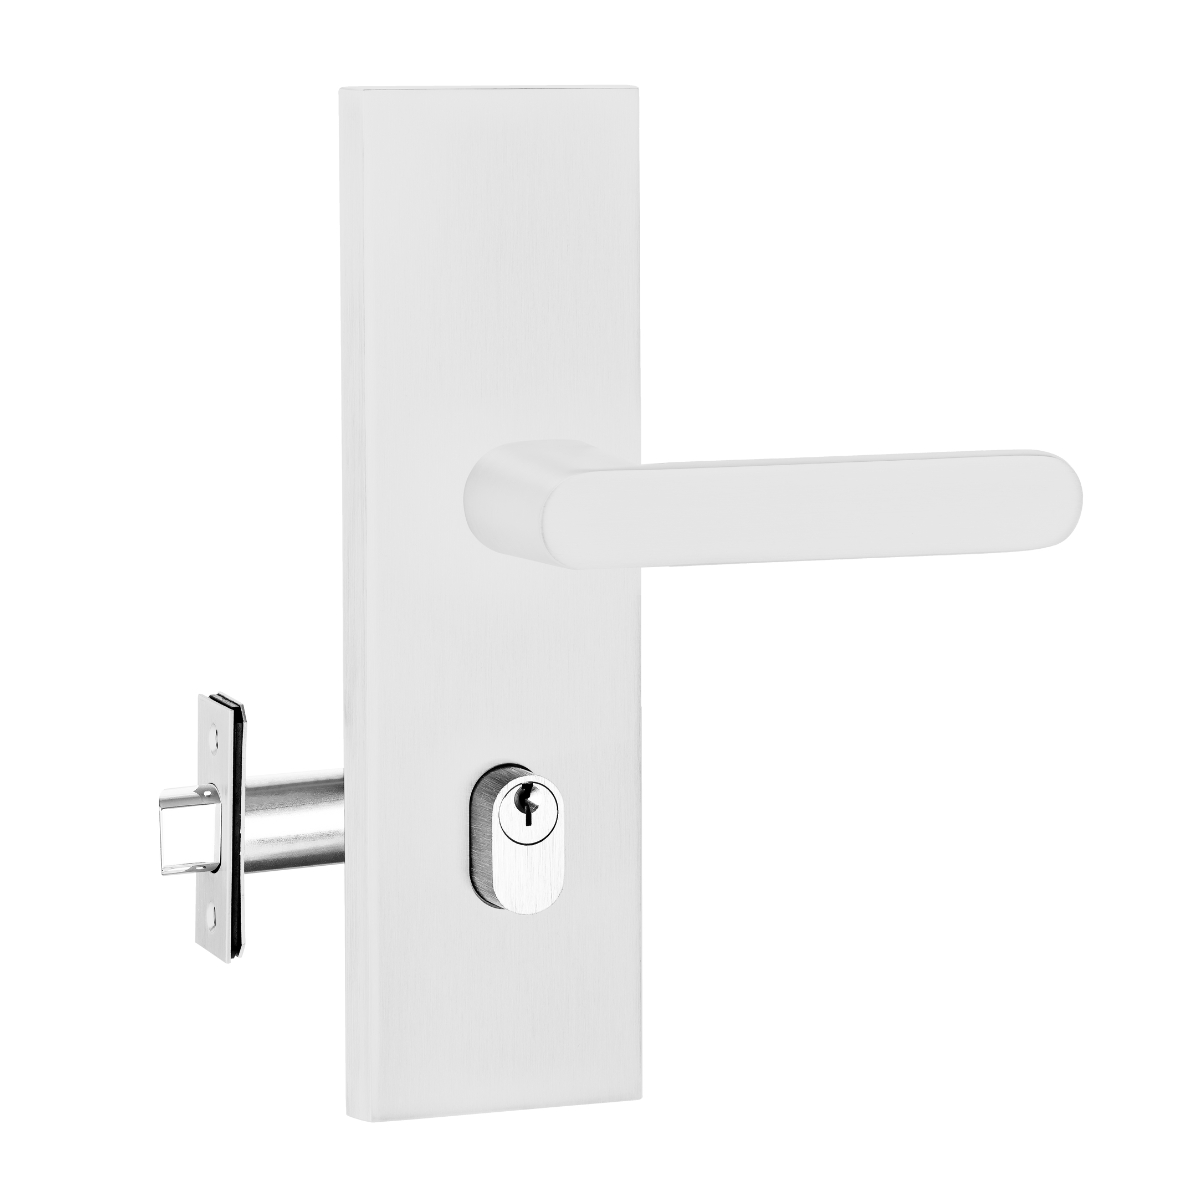 entry pro 3 white front door handle